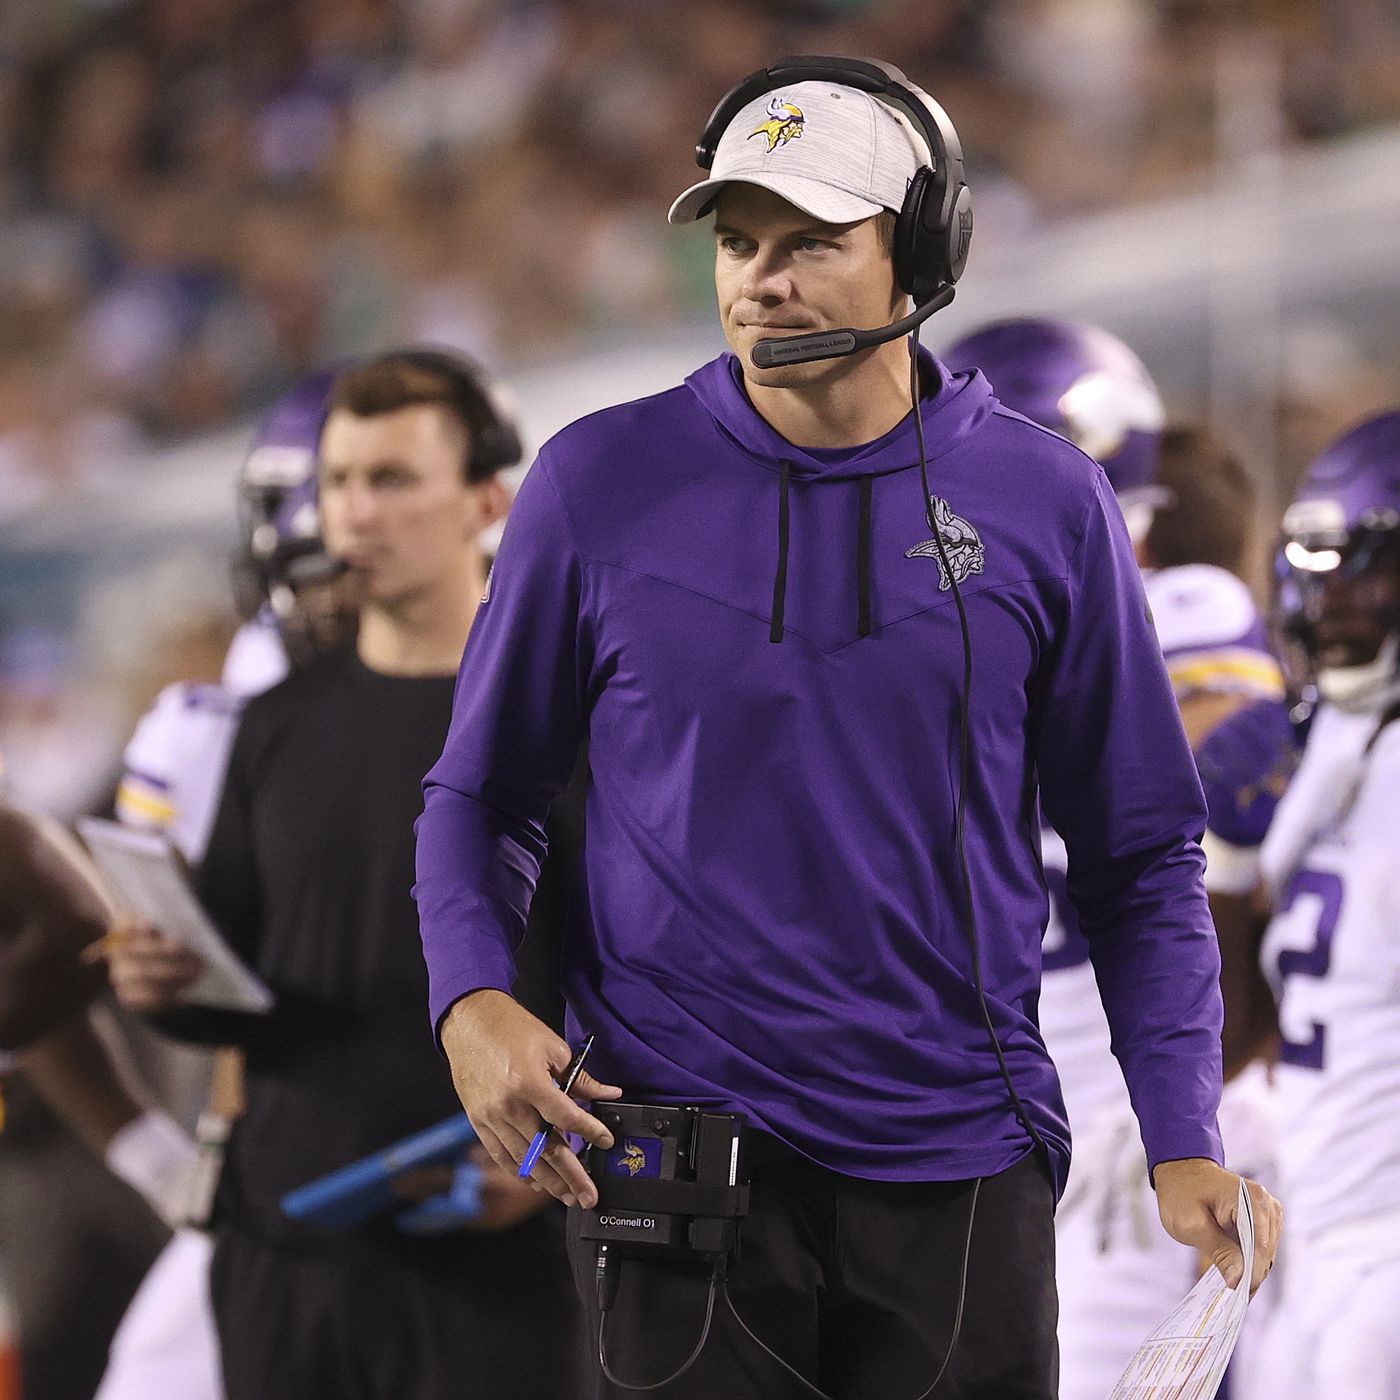 Who is the Coach of the Minnesota Vikings